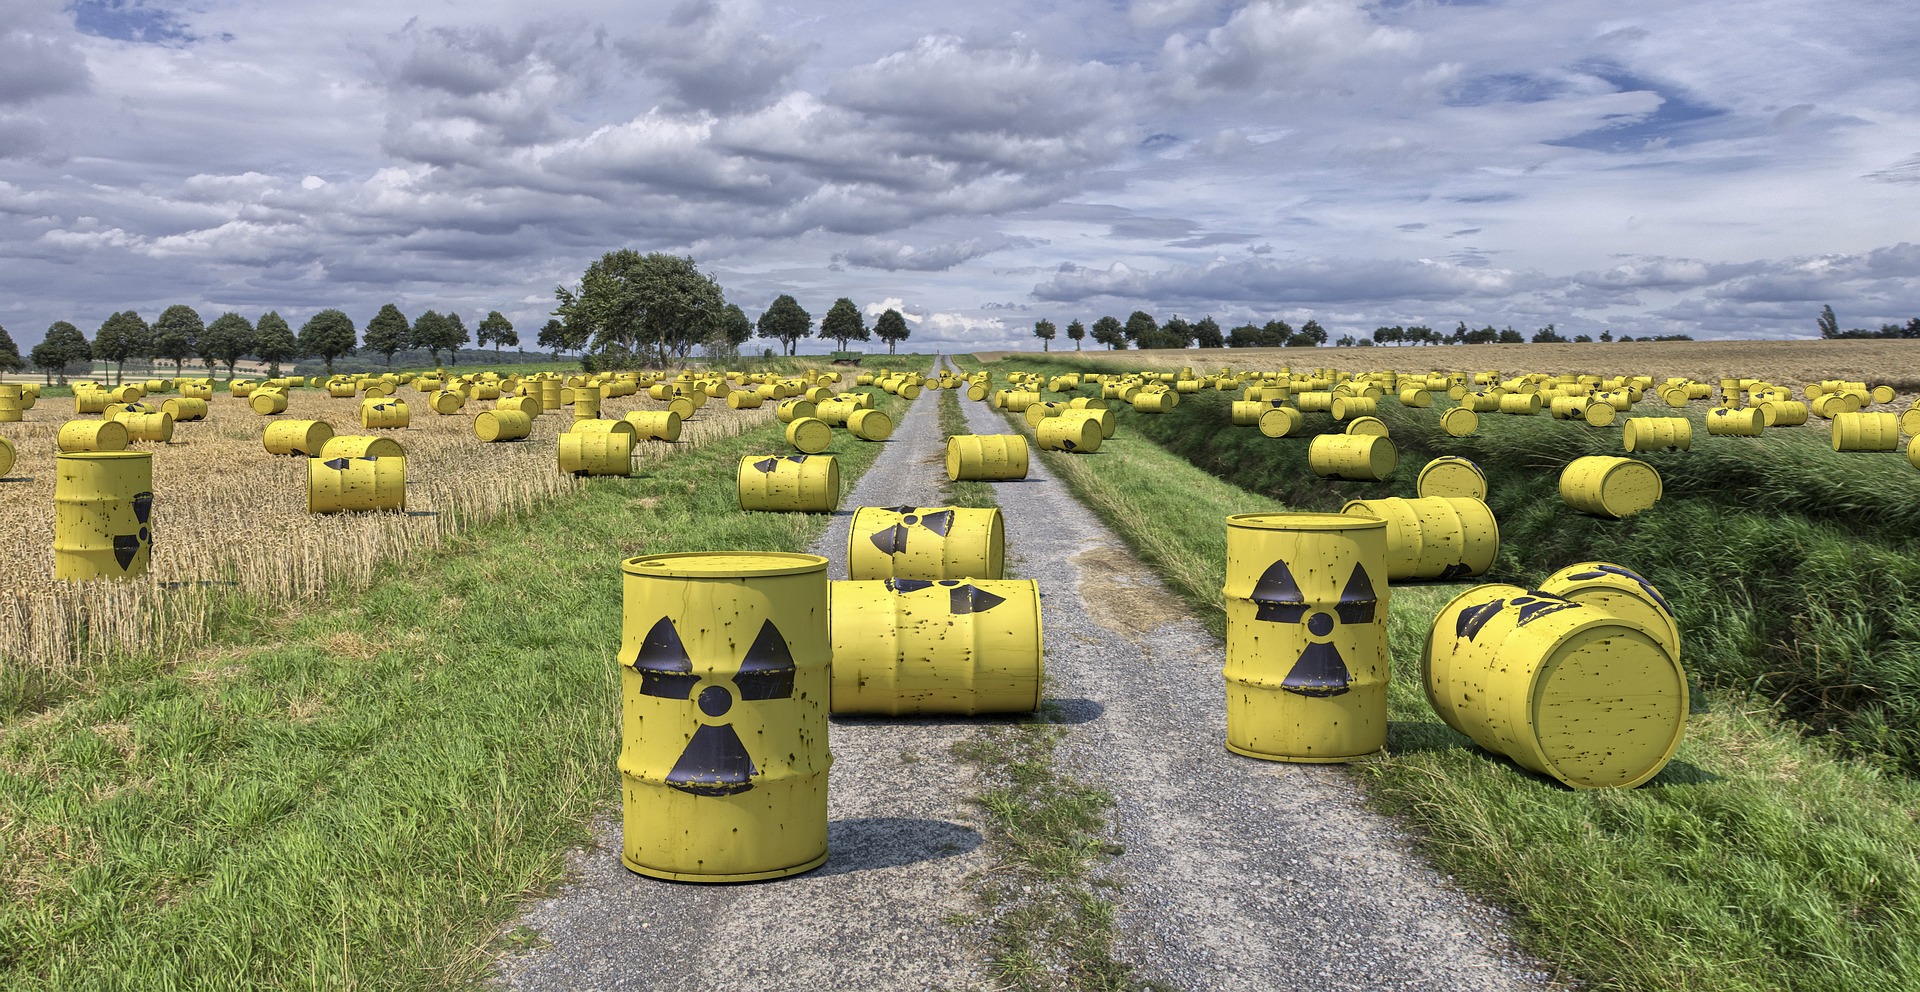 A numerous nuclear waste container